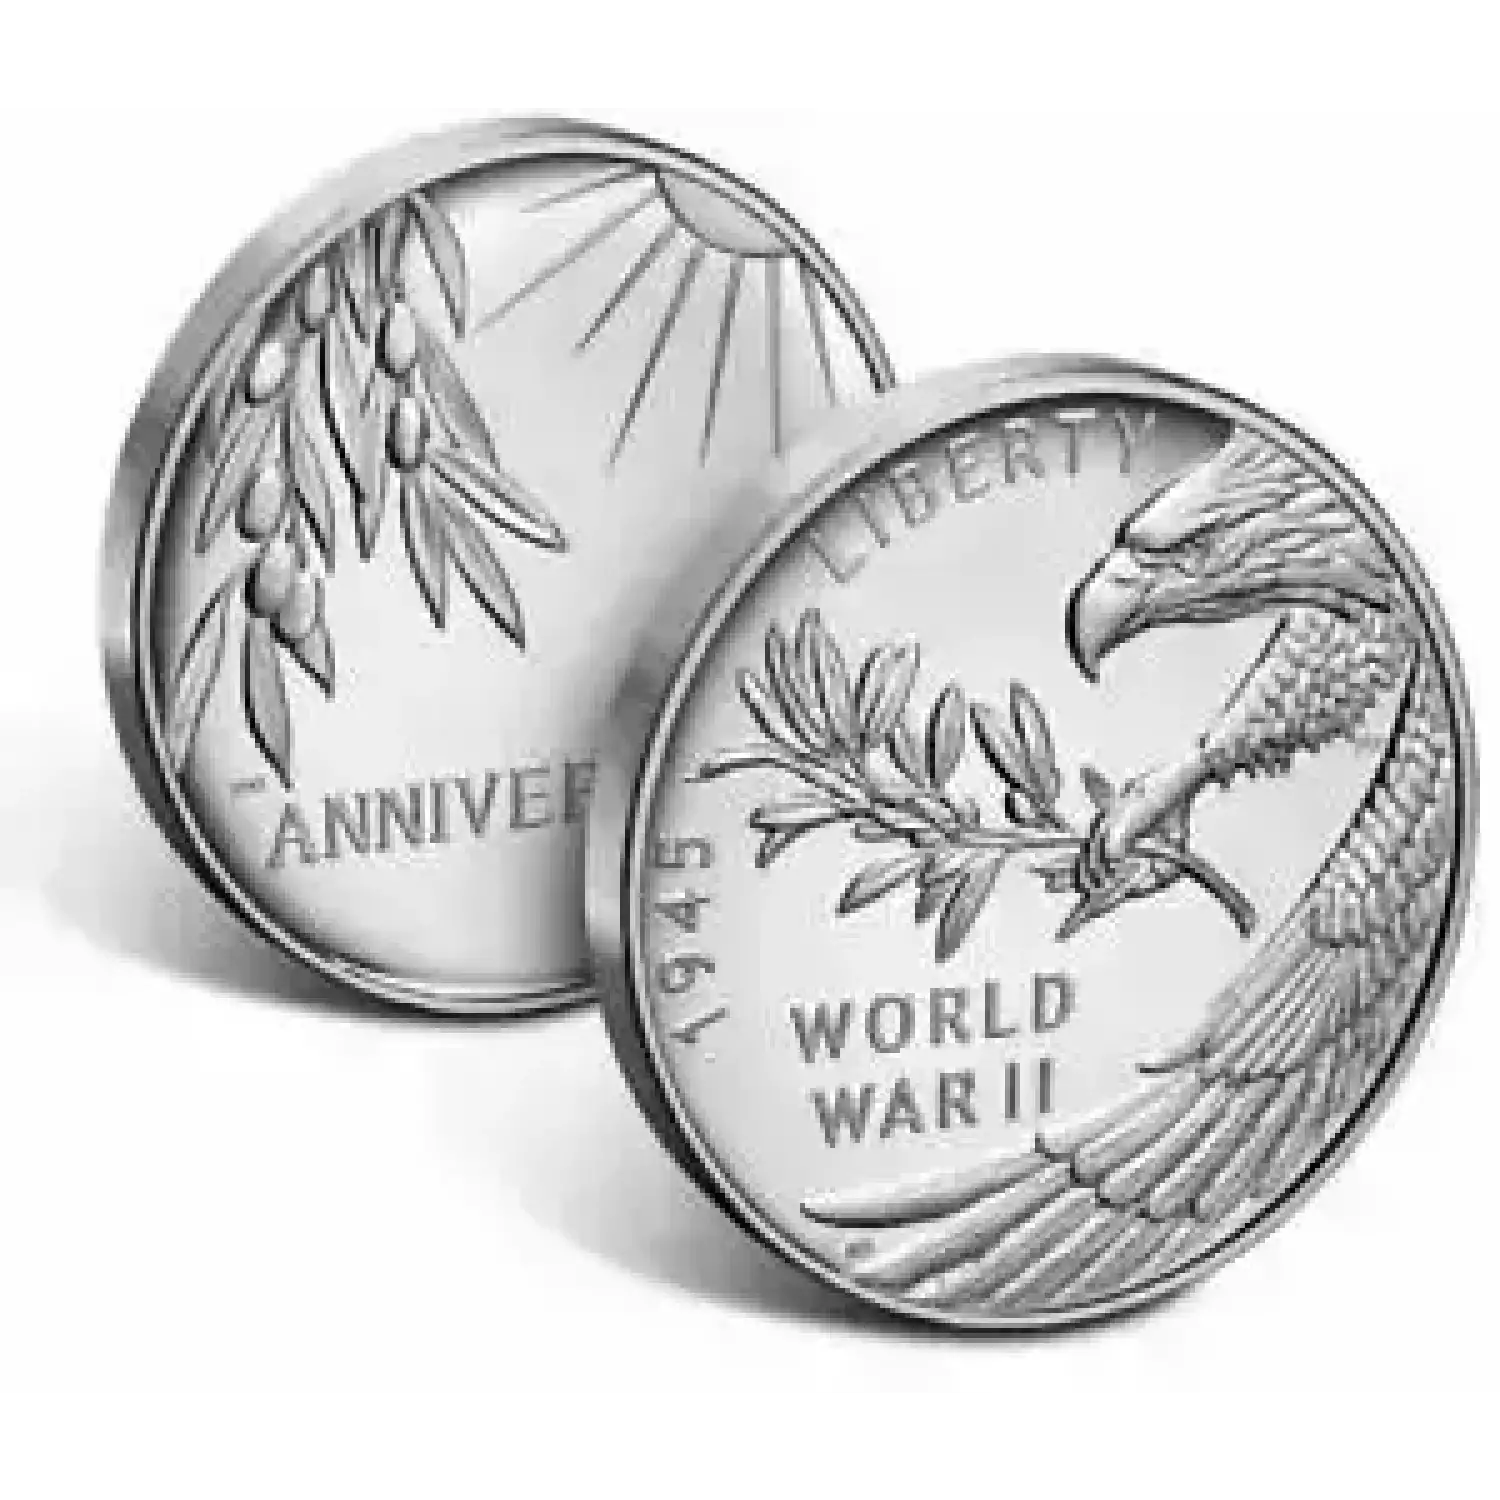 End of World War II 75th Anniversary Silver Medal (2)